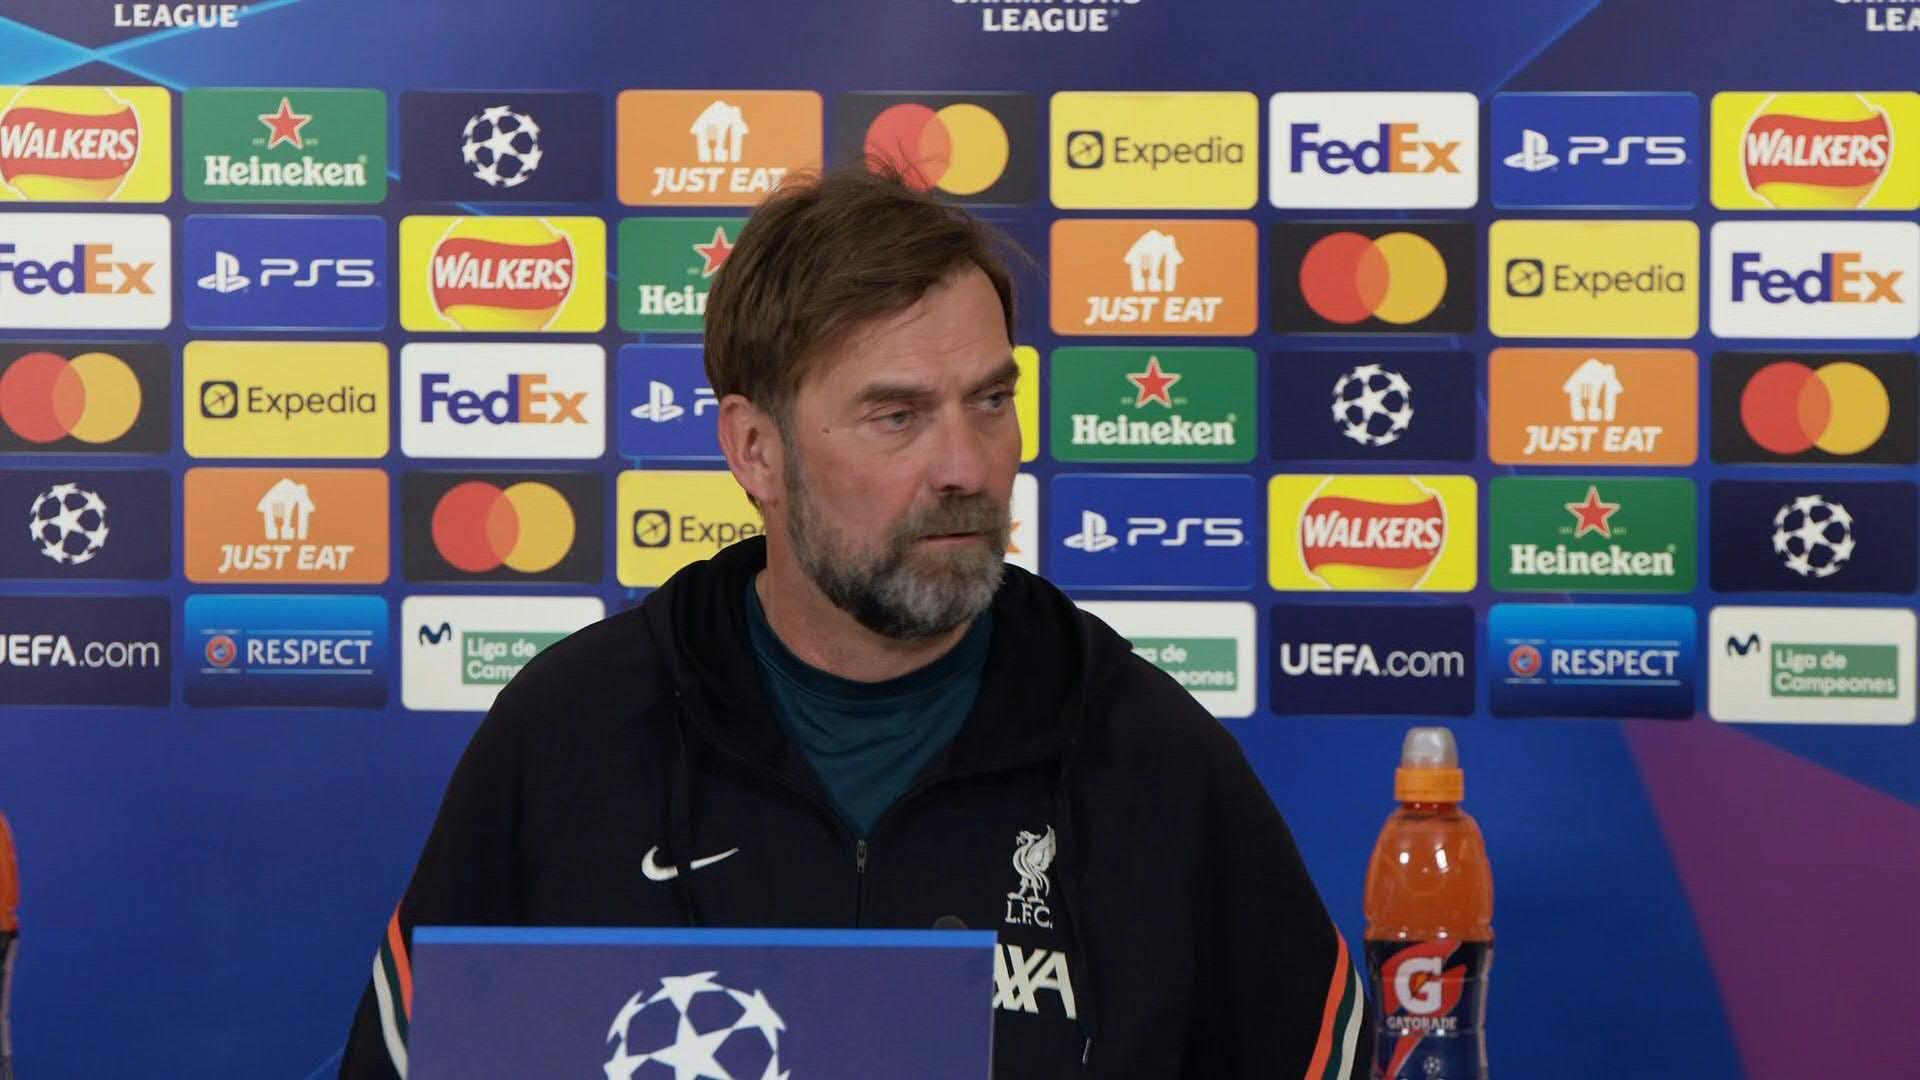 Champions League: Liverpool coach Klopp expects “a tough one” against Villareal